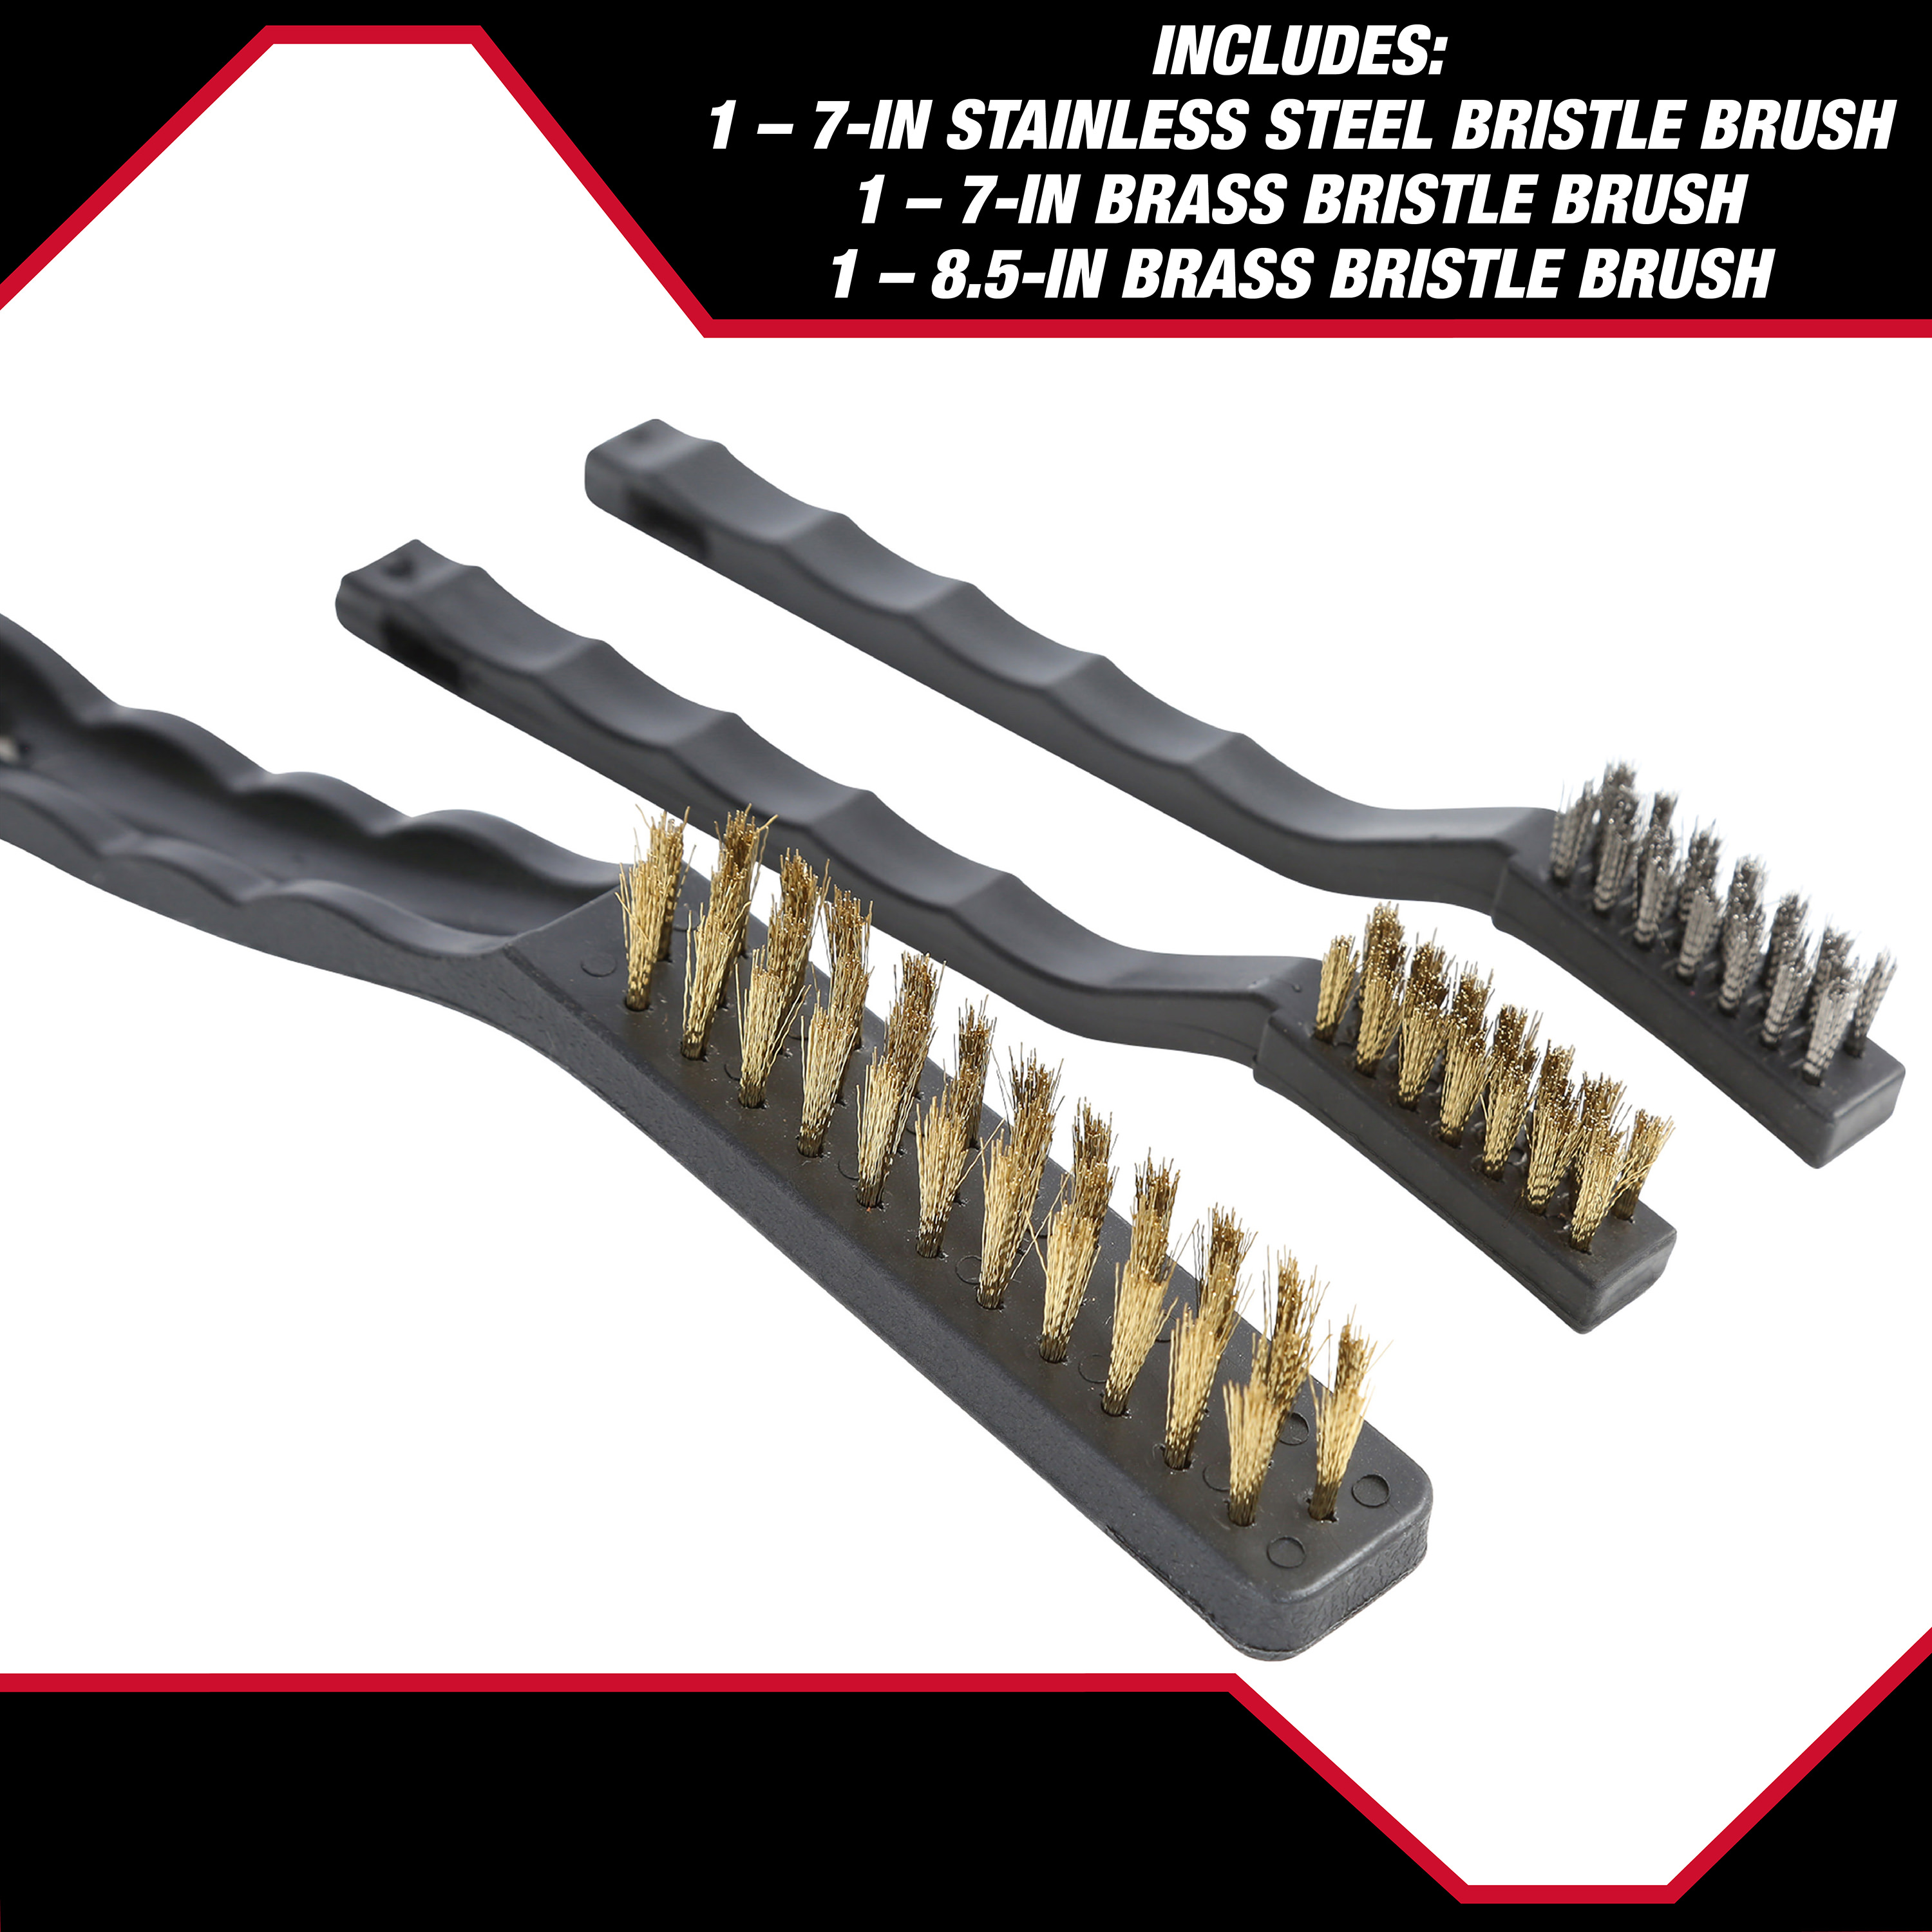 Hyper Tough 3-Piece Wire Brush Set for Utility Cleaning, Brass and Stainless Steel Brushes - image 5 of 8